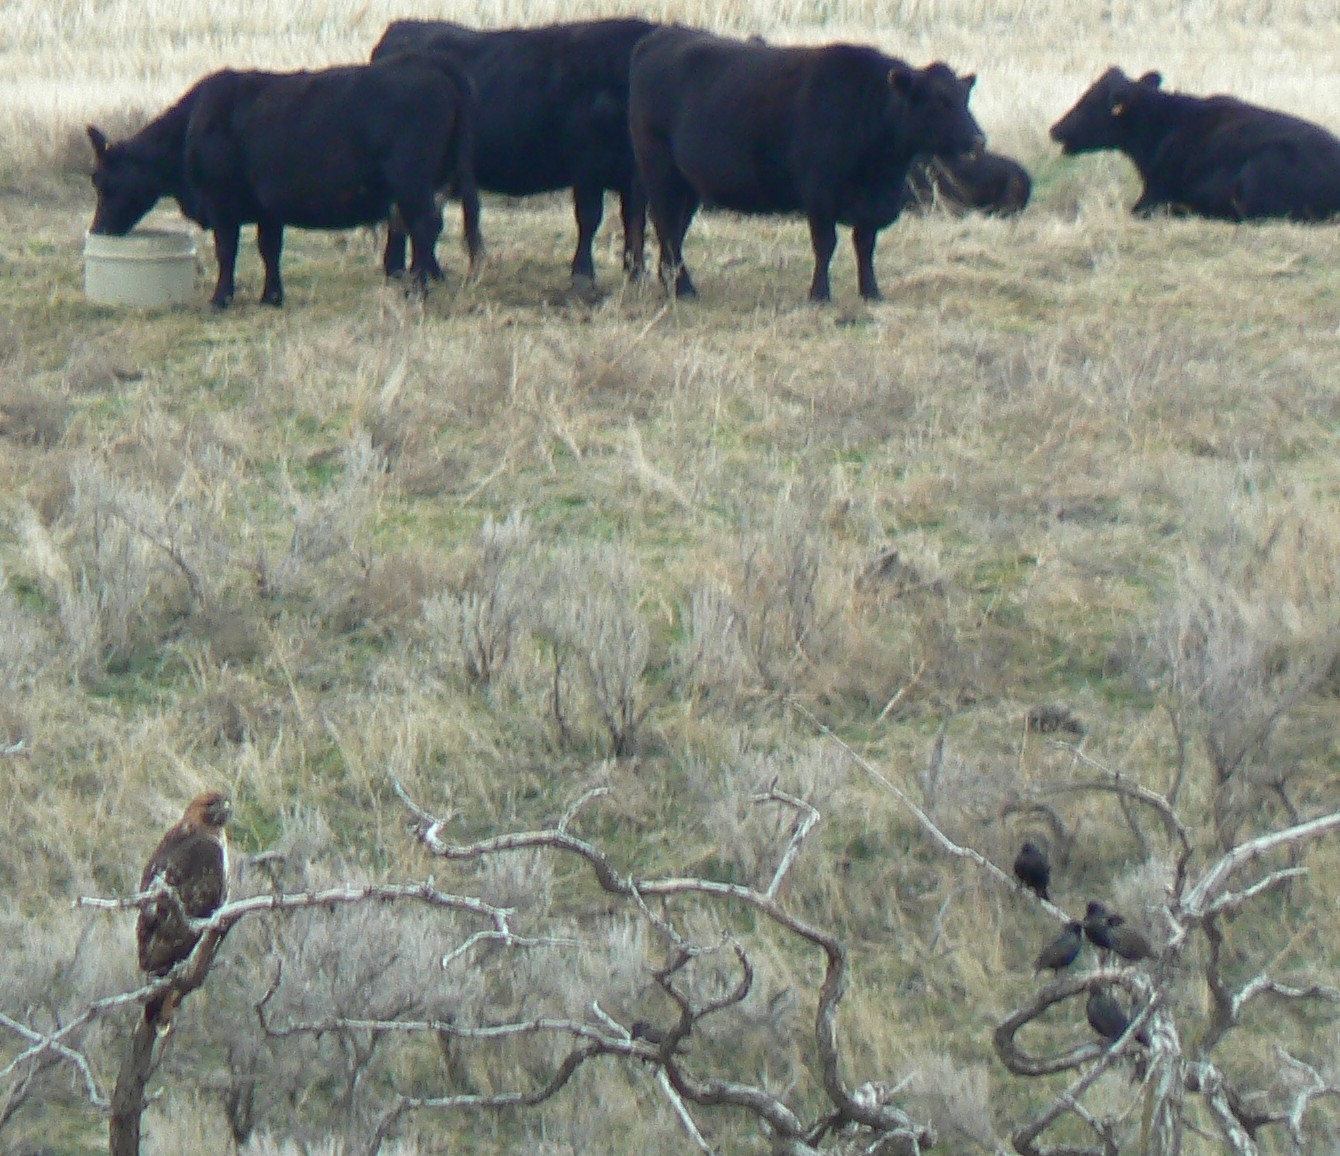 [Red-tailed+Hawk+and+cows.jpg]